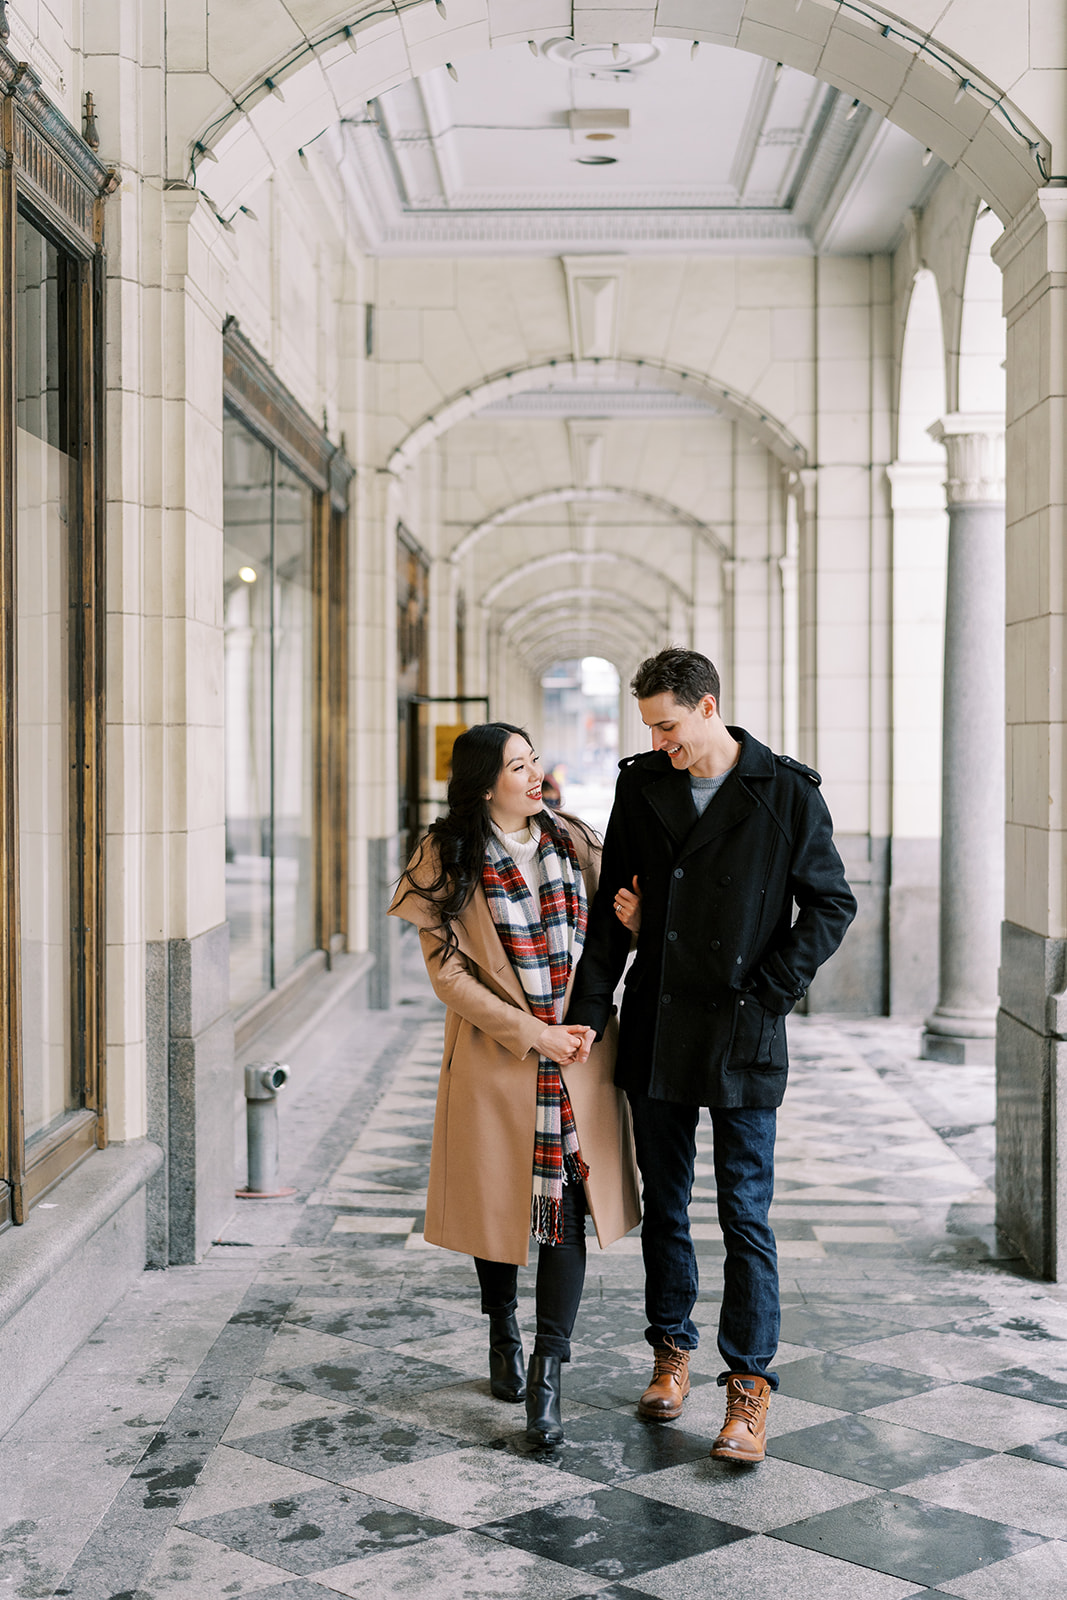 Calgary couple posing and walking in front of the Hudson arches on Stephen Ave, for their downtown engagement session.